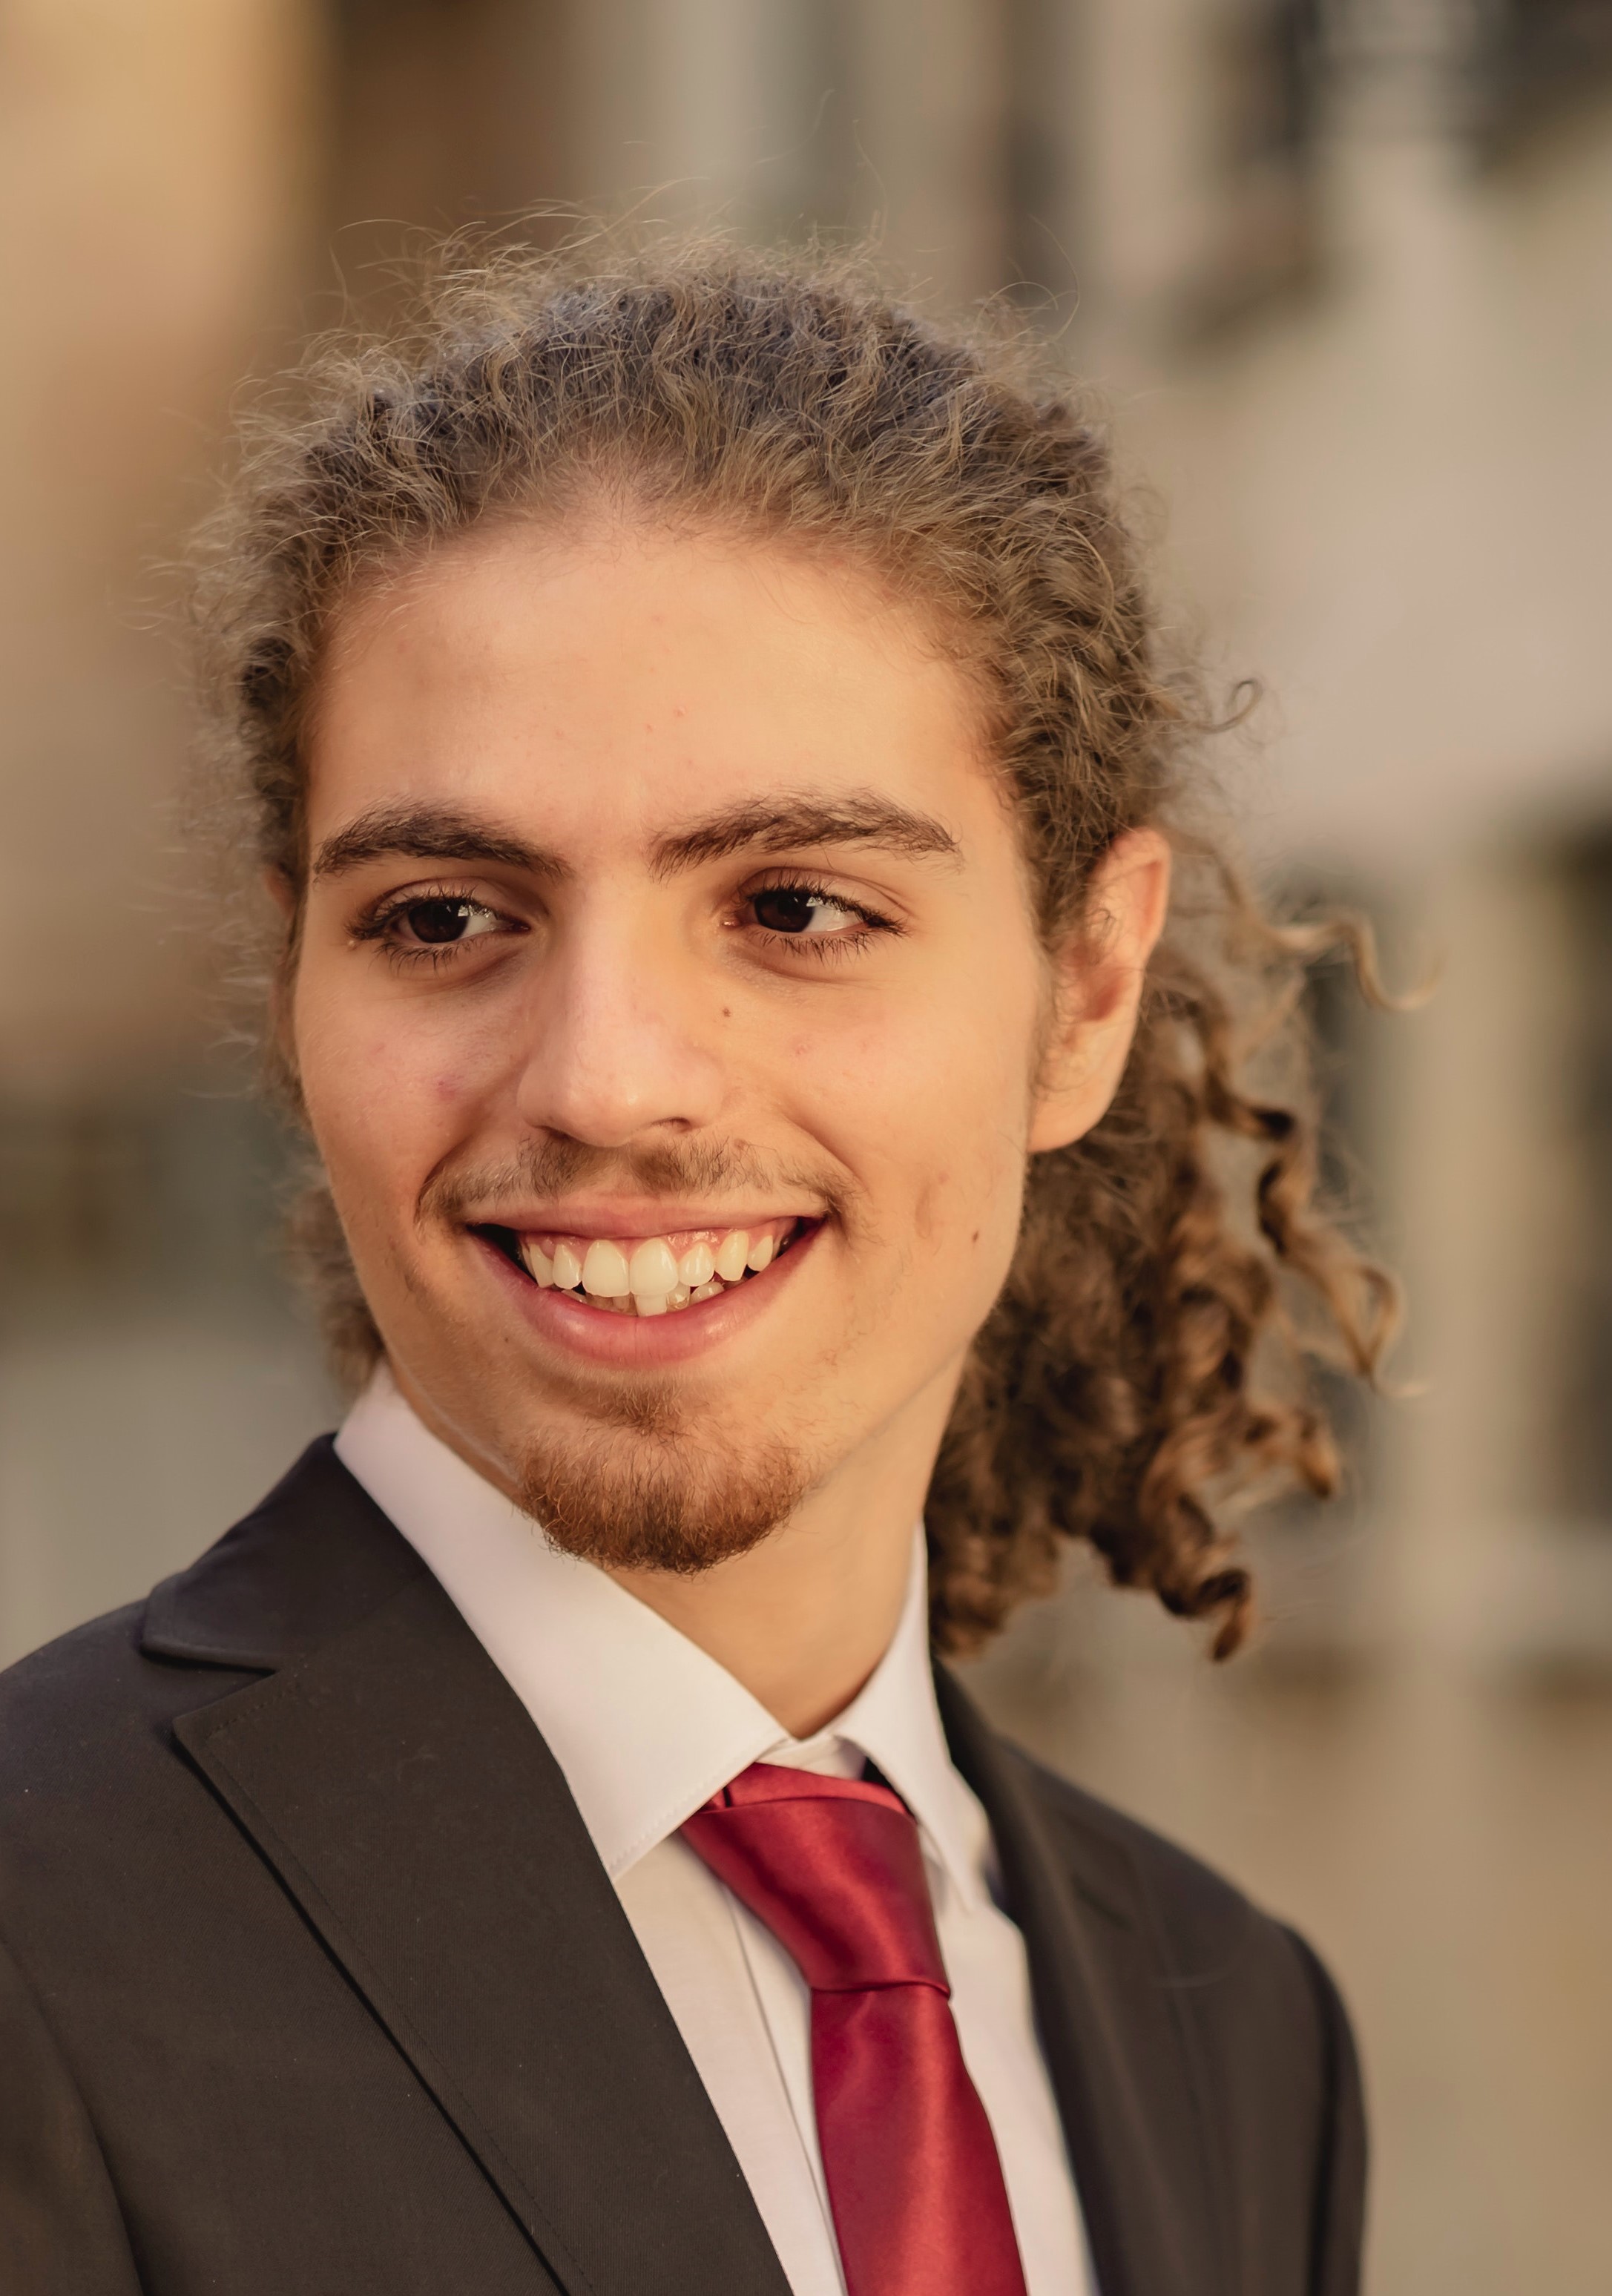 Man in suit with tie smiling with long curly hair tied back and a small amount of facial hair